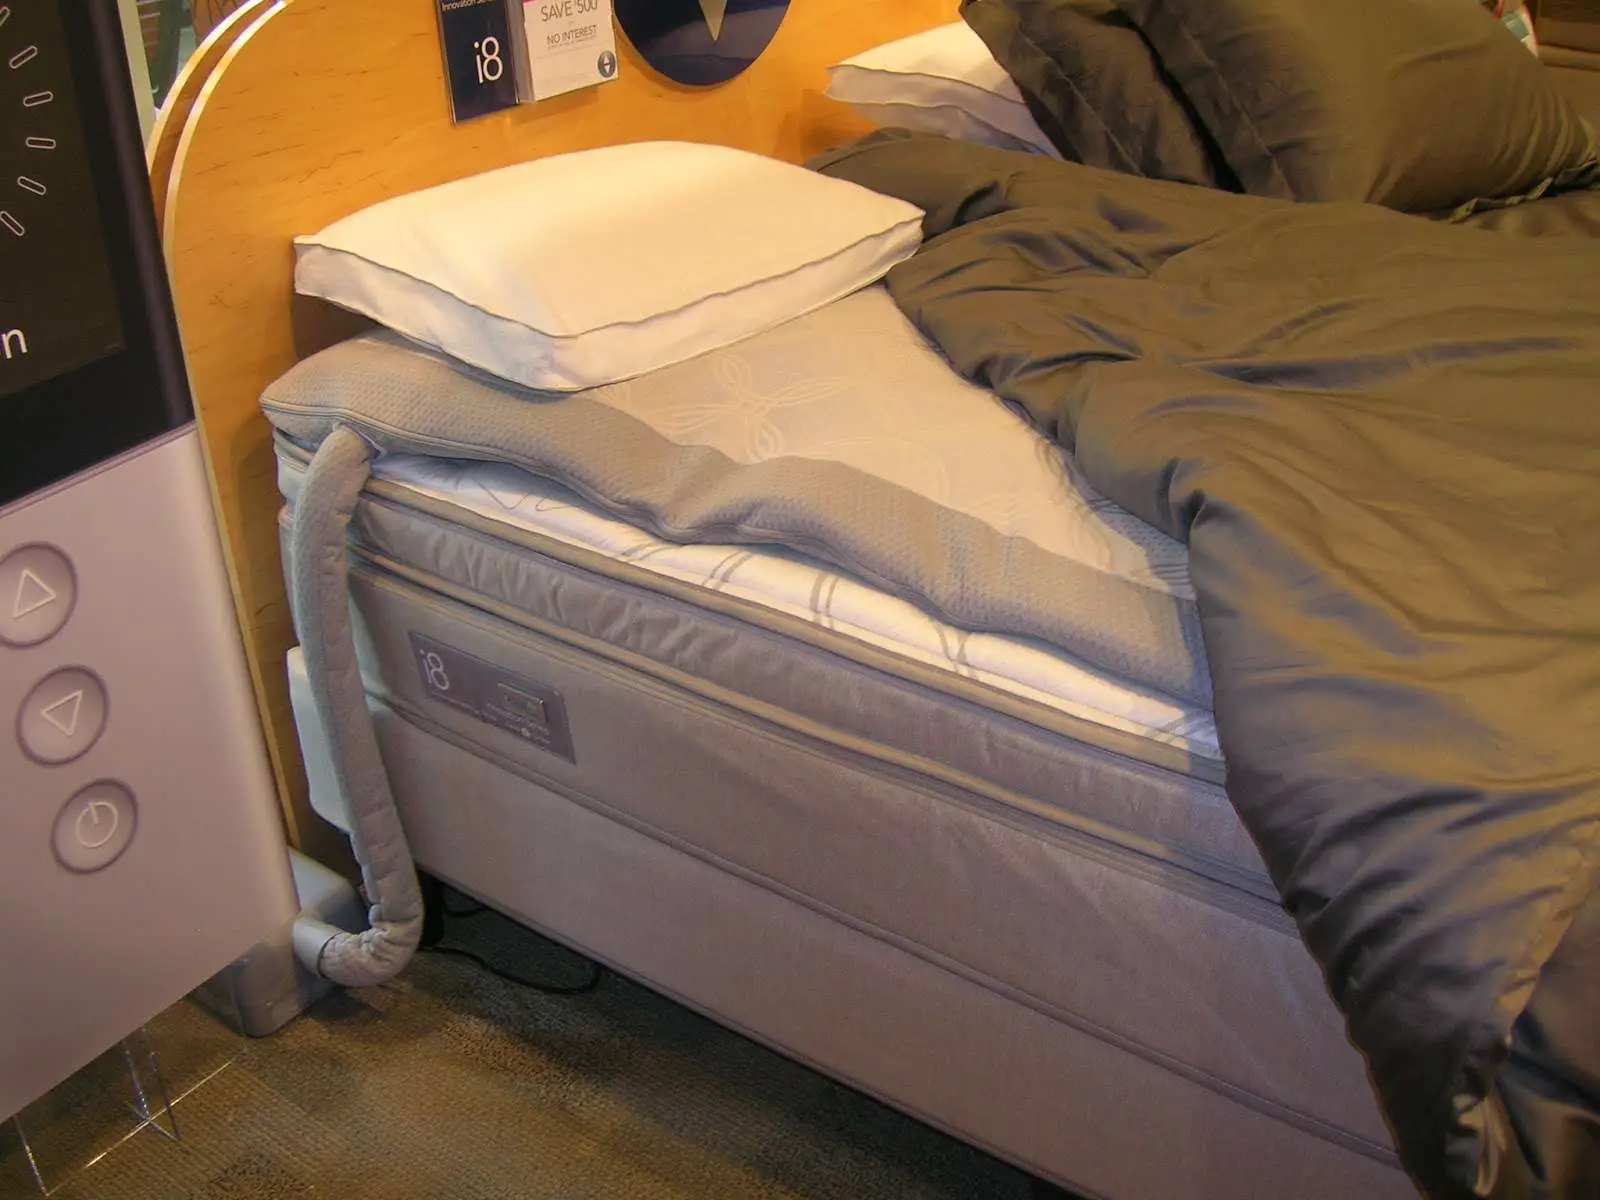 durhamonthecheap: My experiences with the DualTemp layer Sleep Number bed